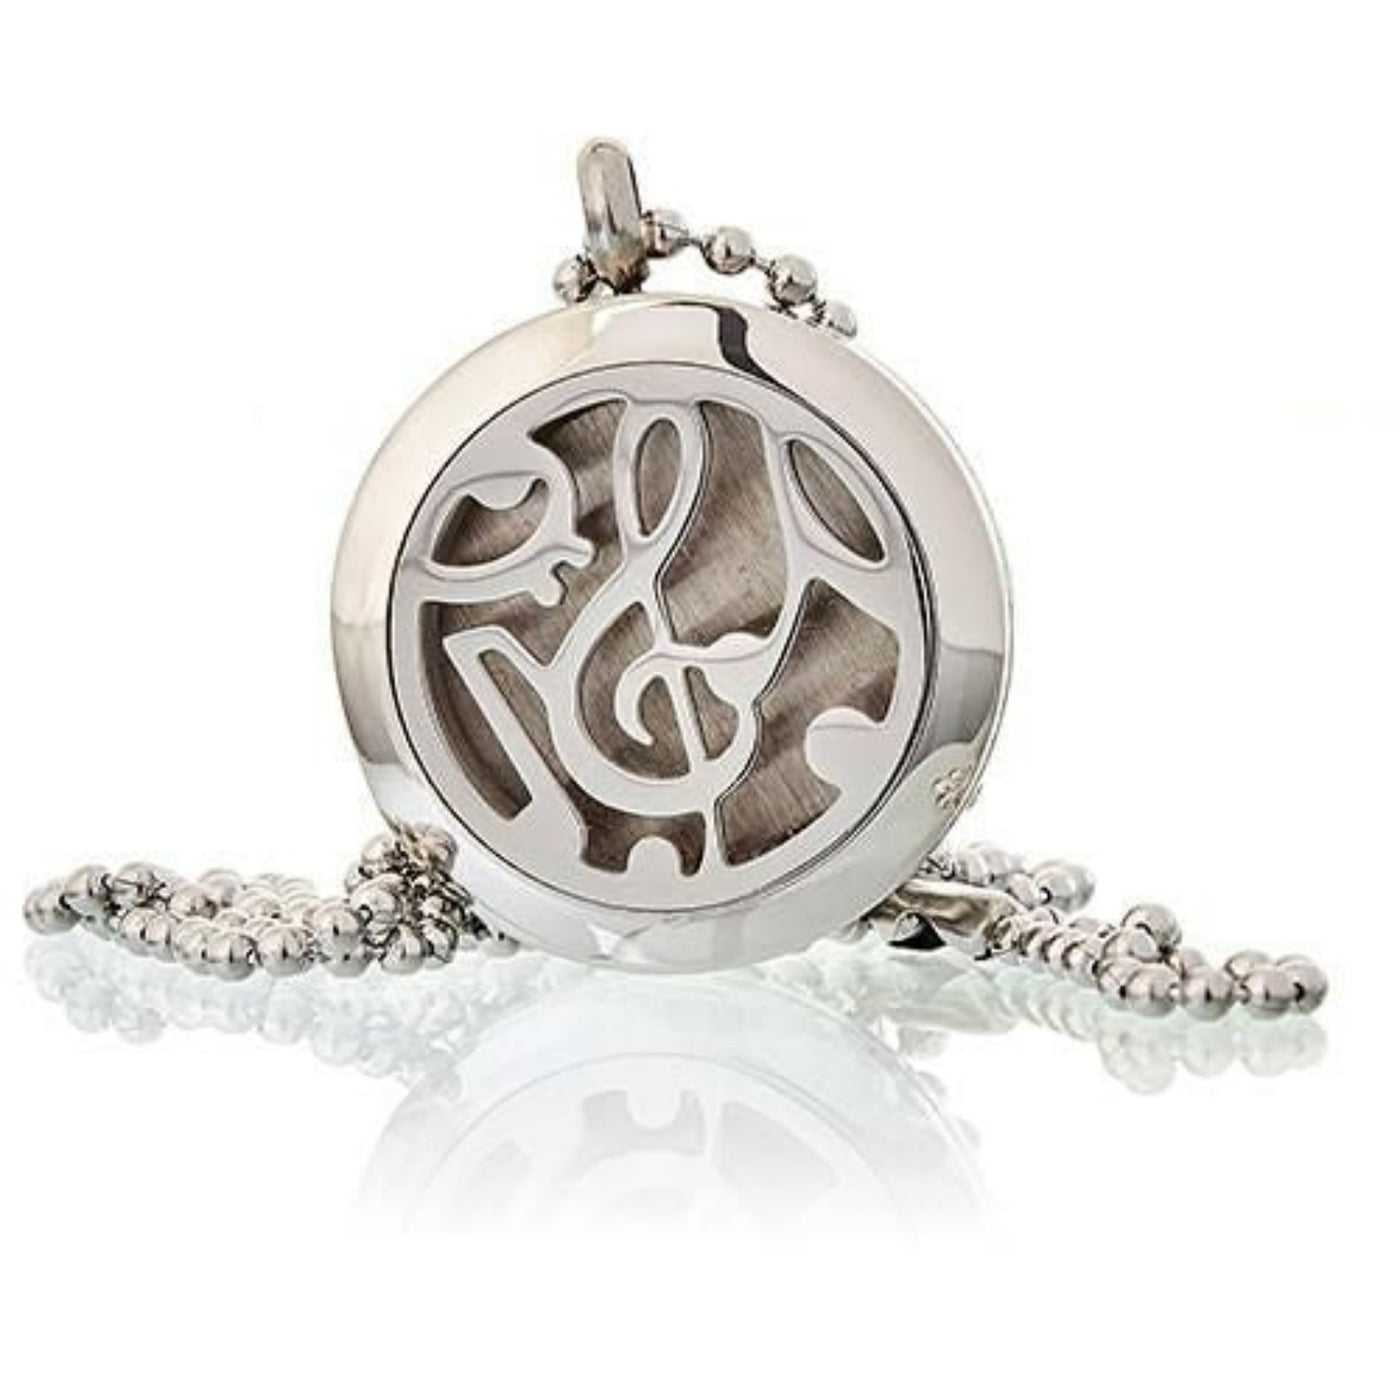 Aromatherapy Diffuser Necklace Music Notes Women's Necklace 25mm.